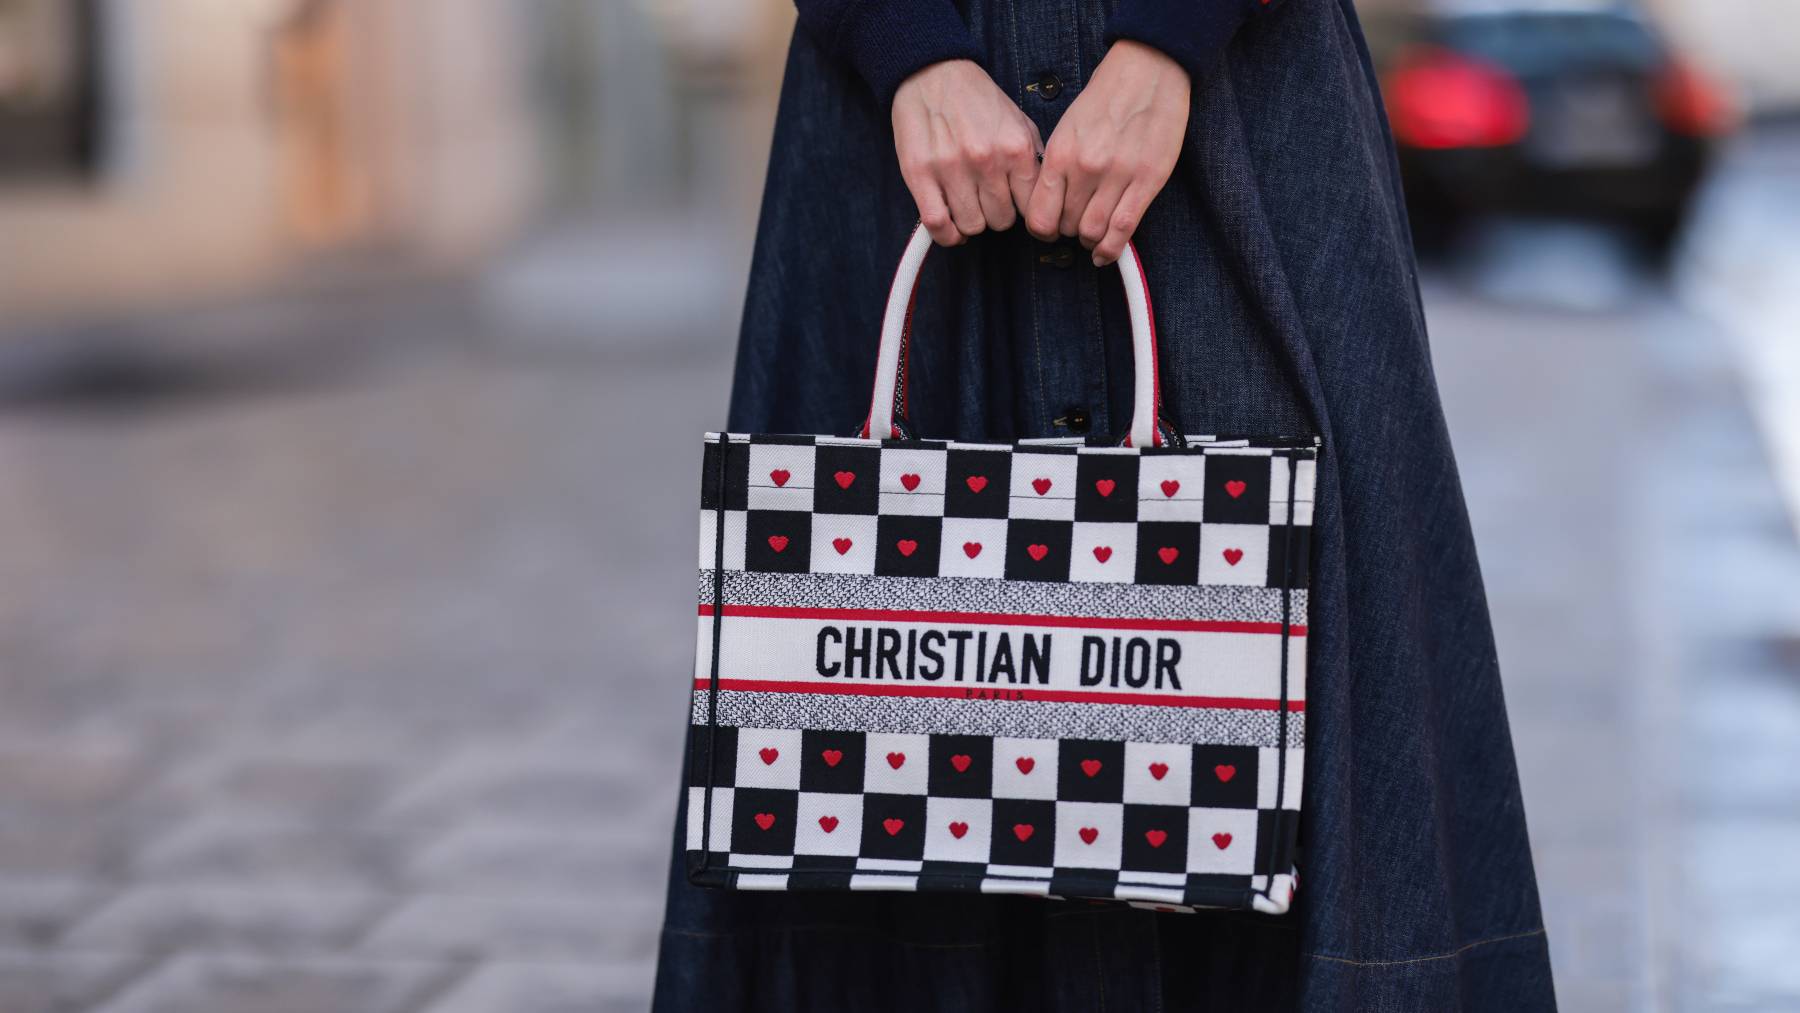 Dior's book tote is just one of many tote bags seeing a boom in attention.